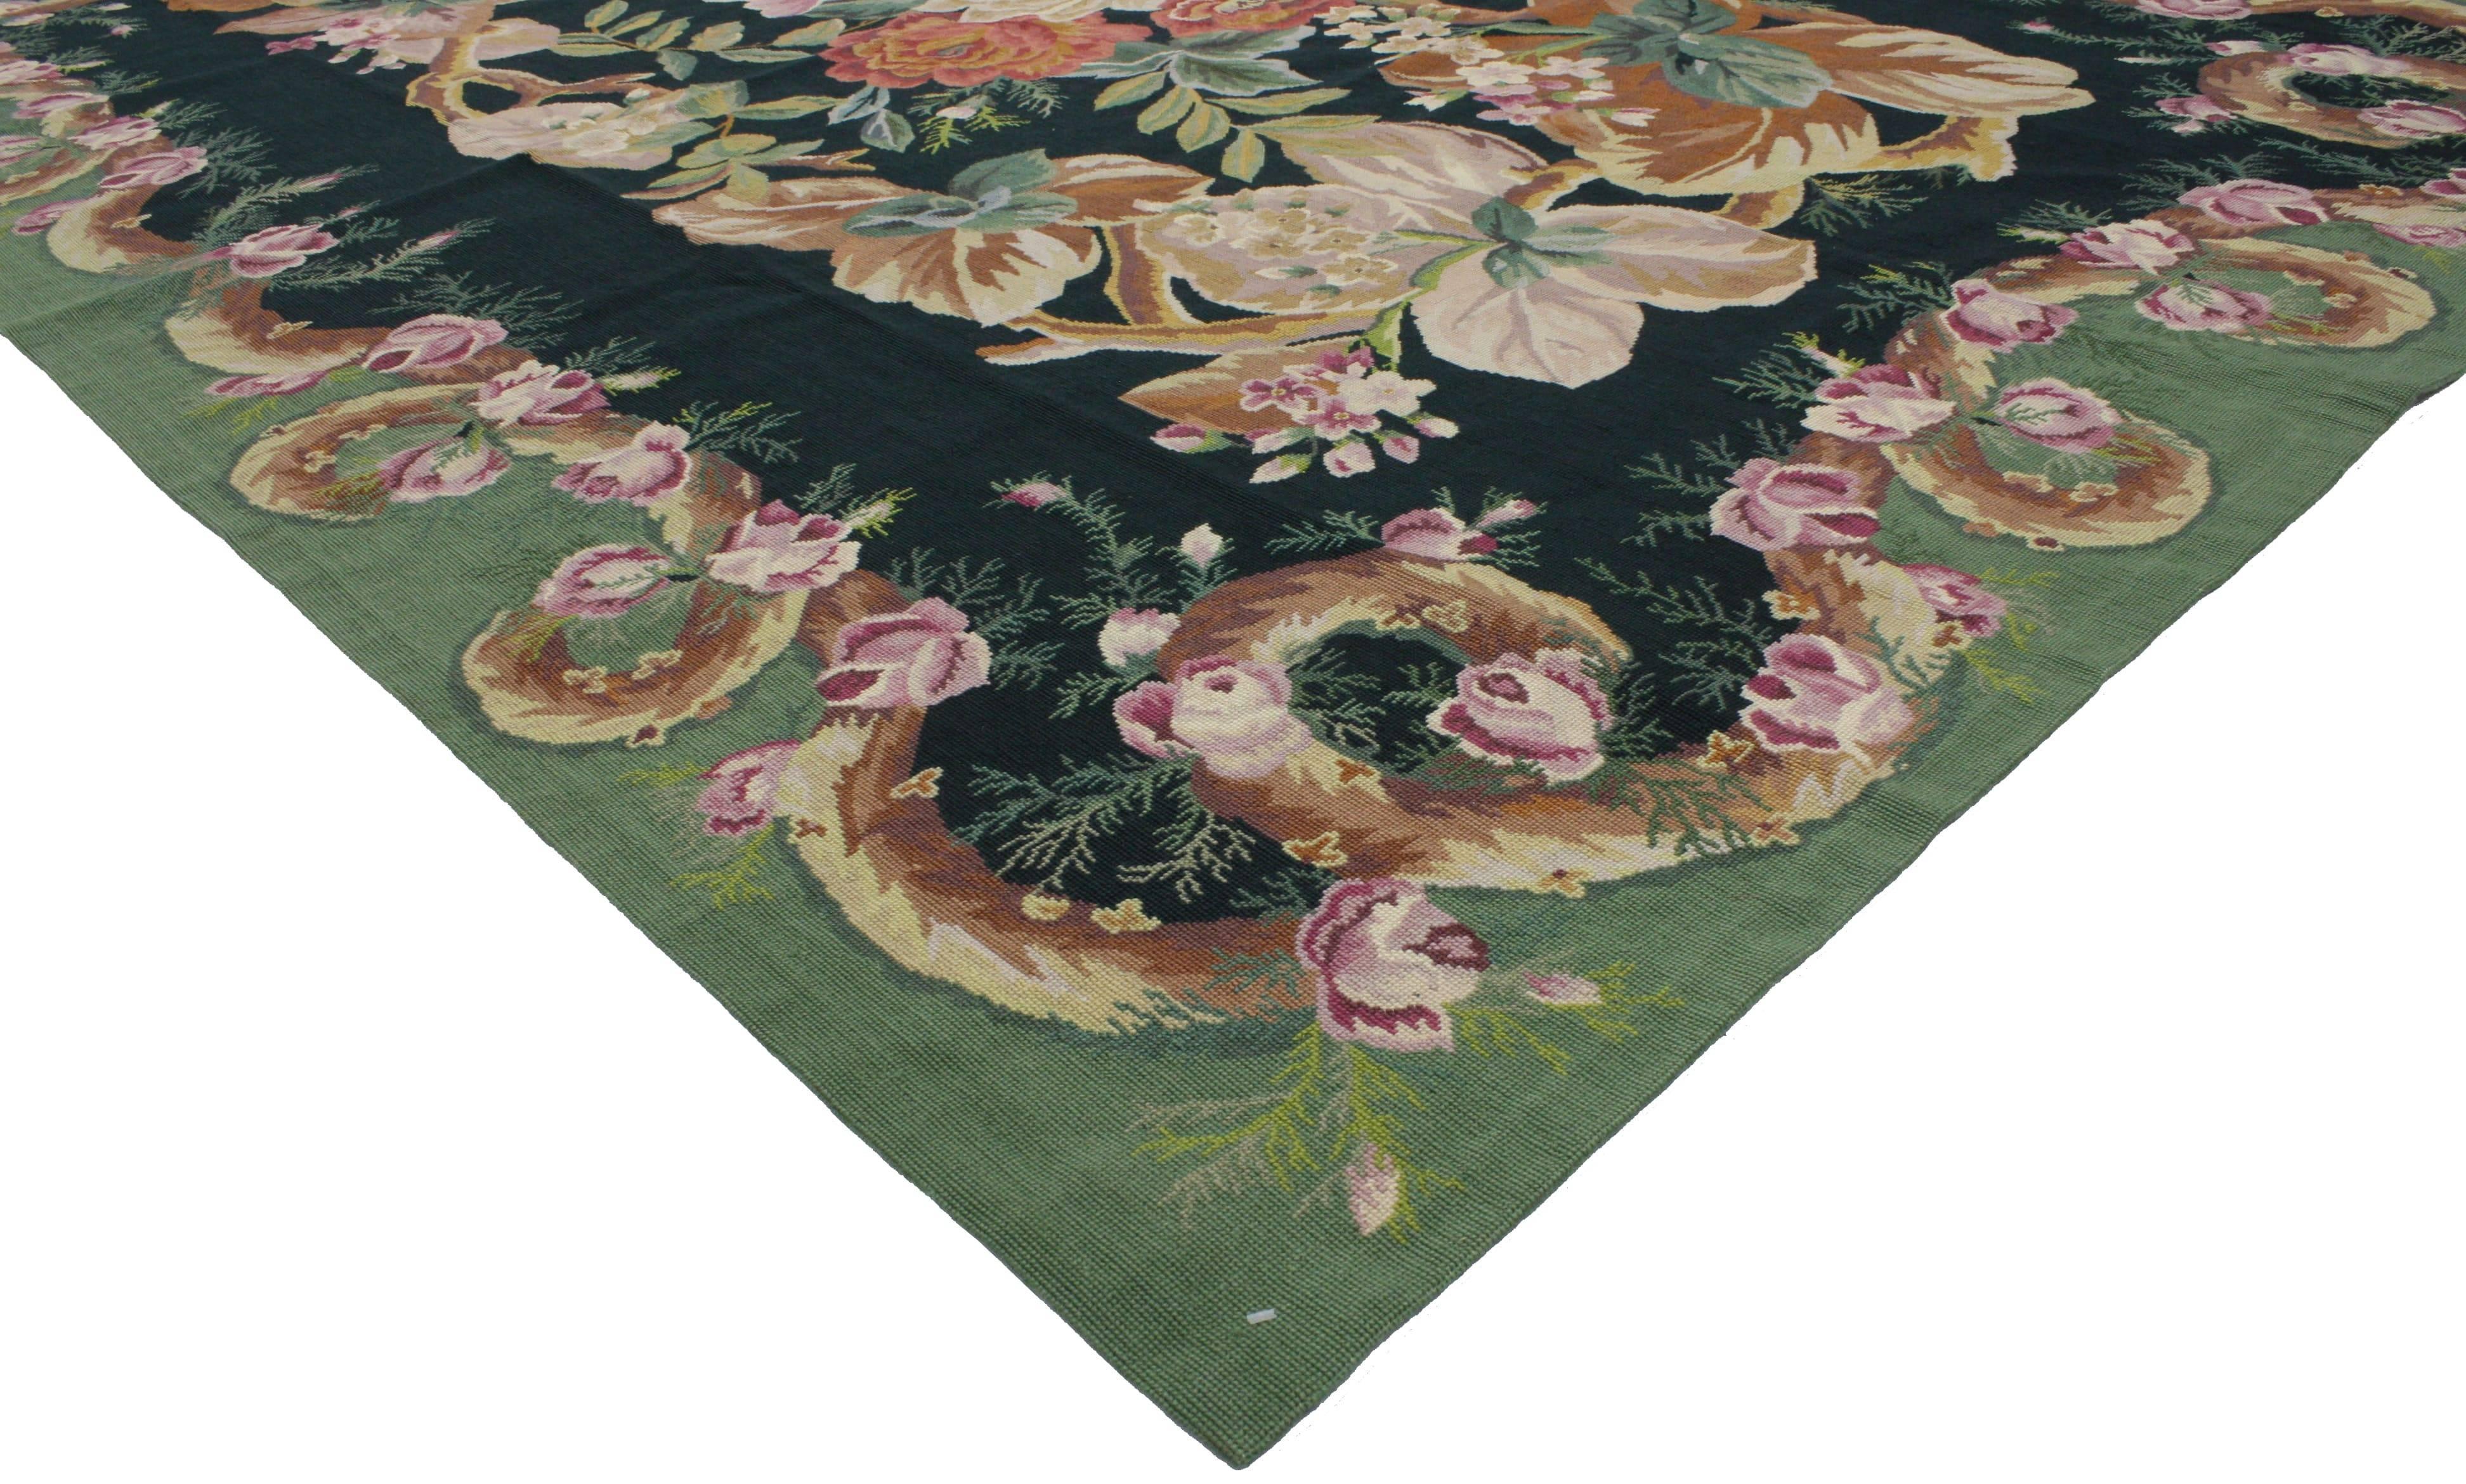 76661, vintage Chinese Aubusson style needlepoint rug with French Provincial style. This vintage Aubusson style needlepoint rug features a large-scale floral bouquet showing the intricate detailing of roses, florals and leaves. A double colored